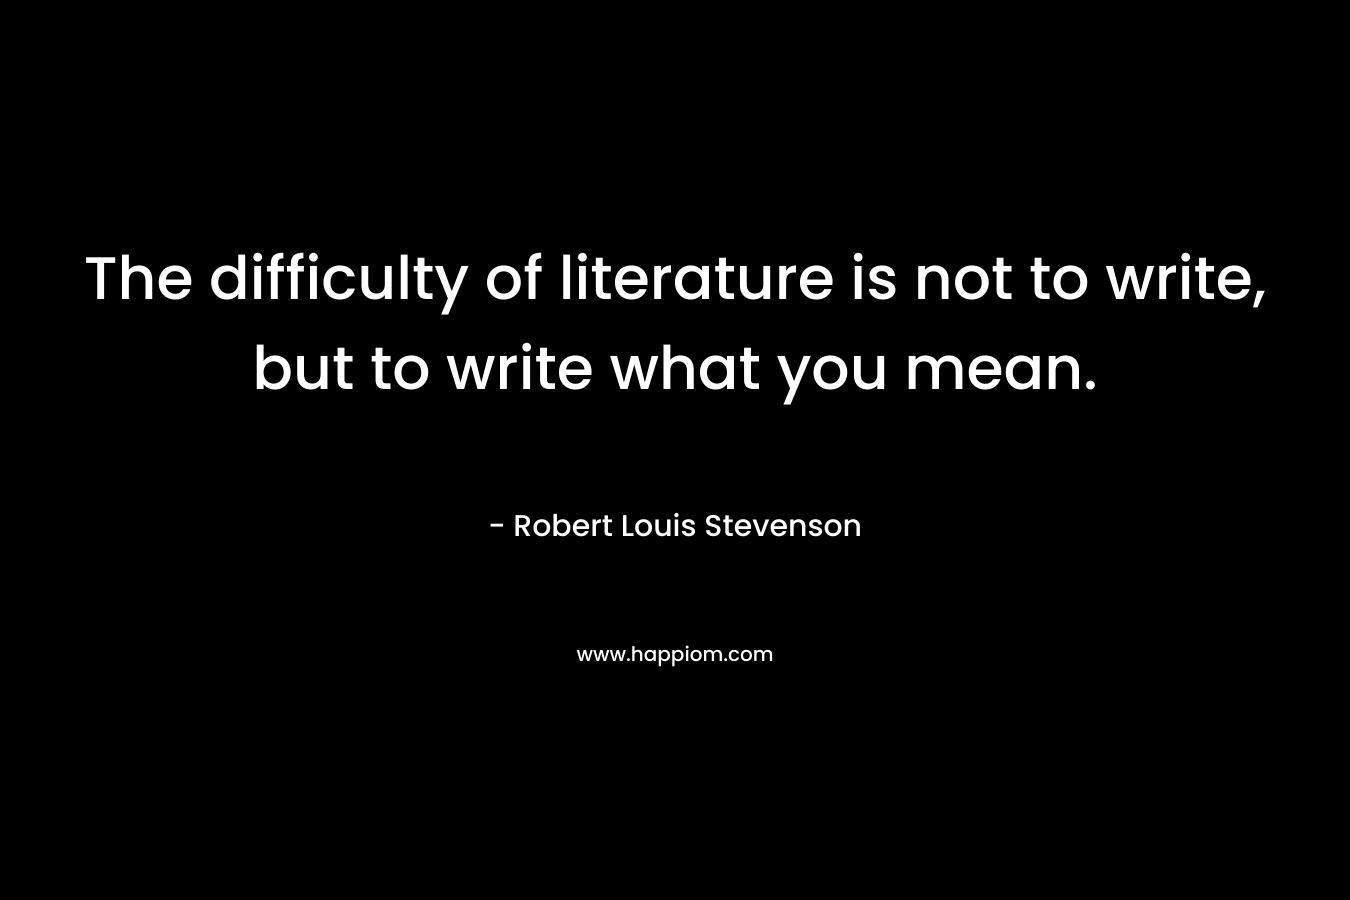 The difficulty of literature is not to write, but to write what you mean. – Robert Louis Stevenson